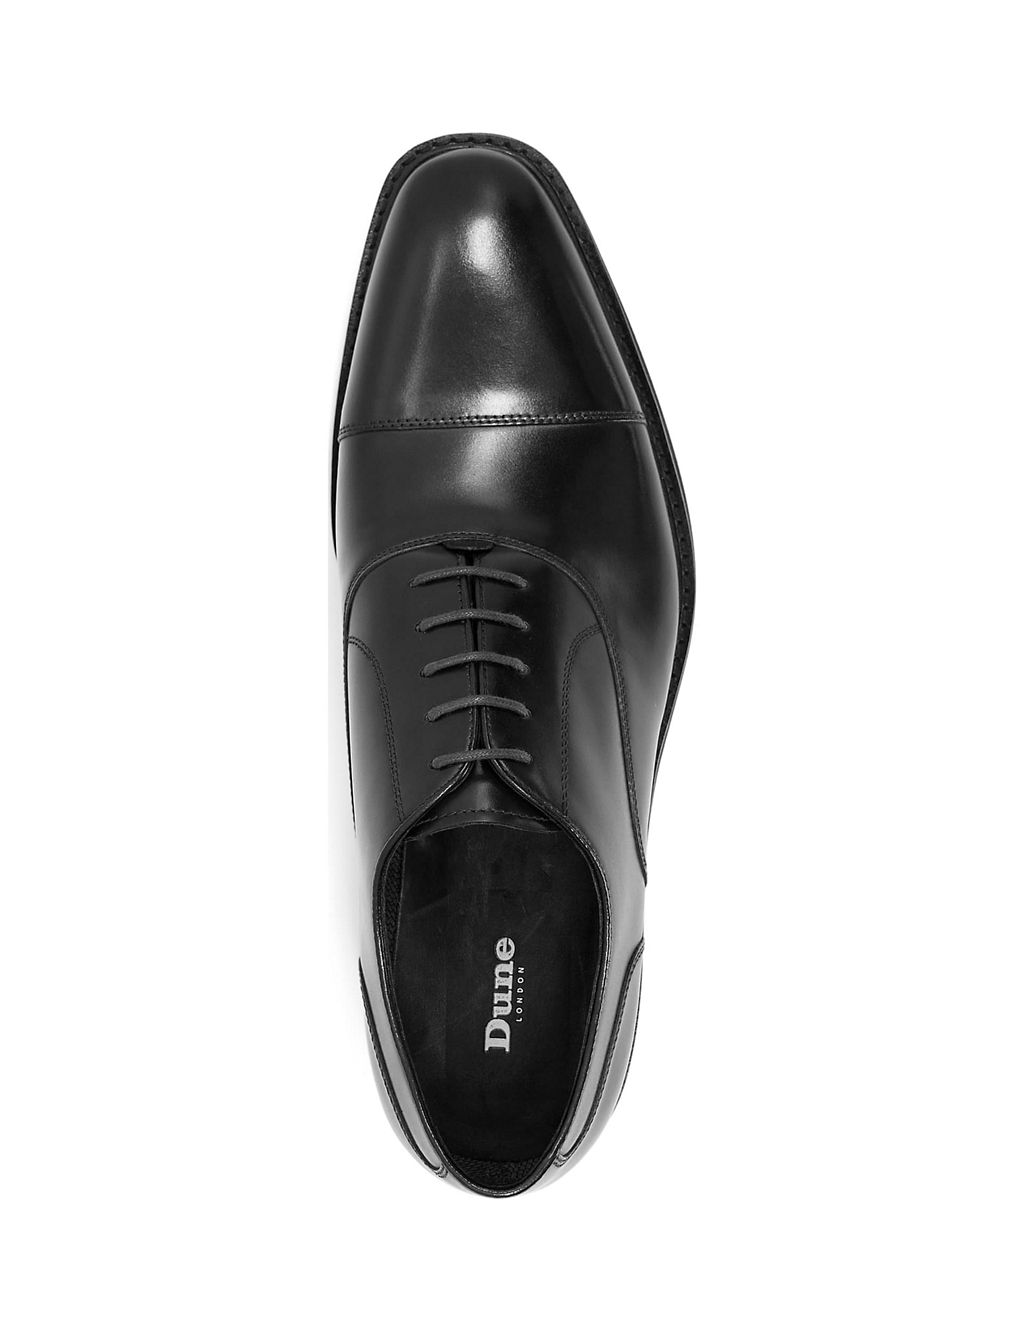 Leather Oxford Shoes 2 of 4